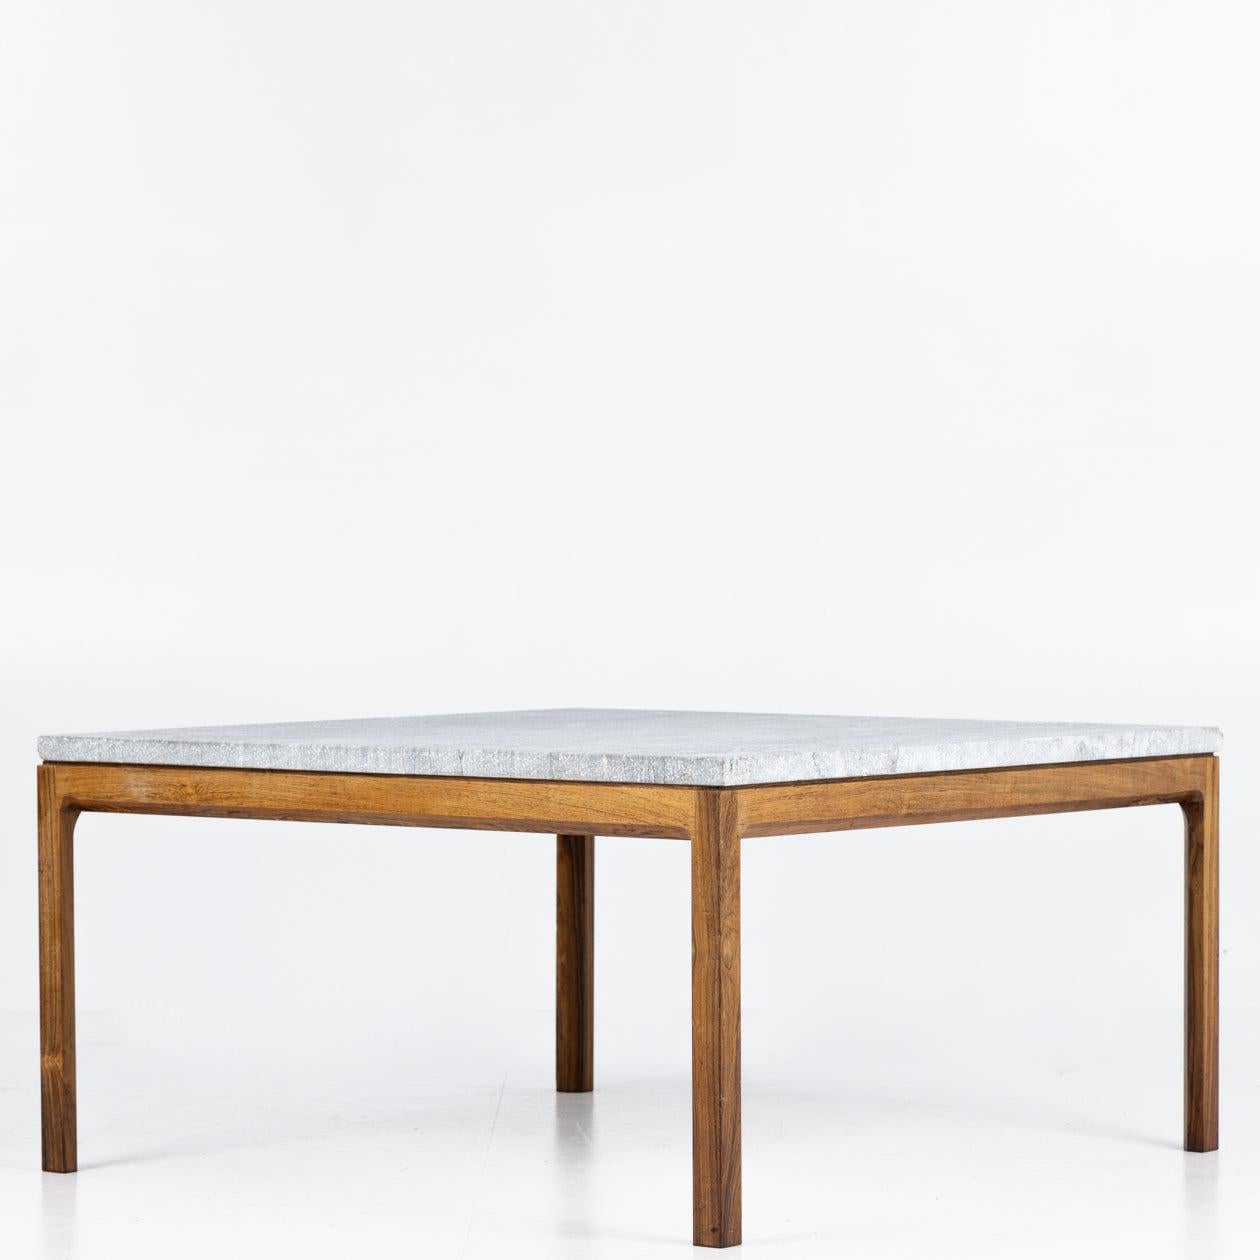 Coffee table in rosewood and Cippolini marble top.
Manufactered by Wørts Møbelsnedkeri.